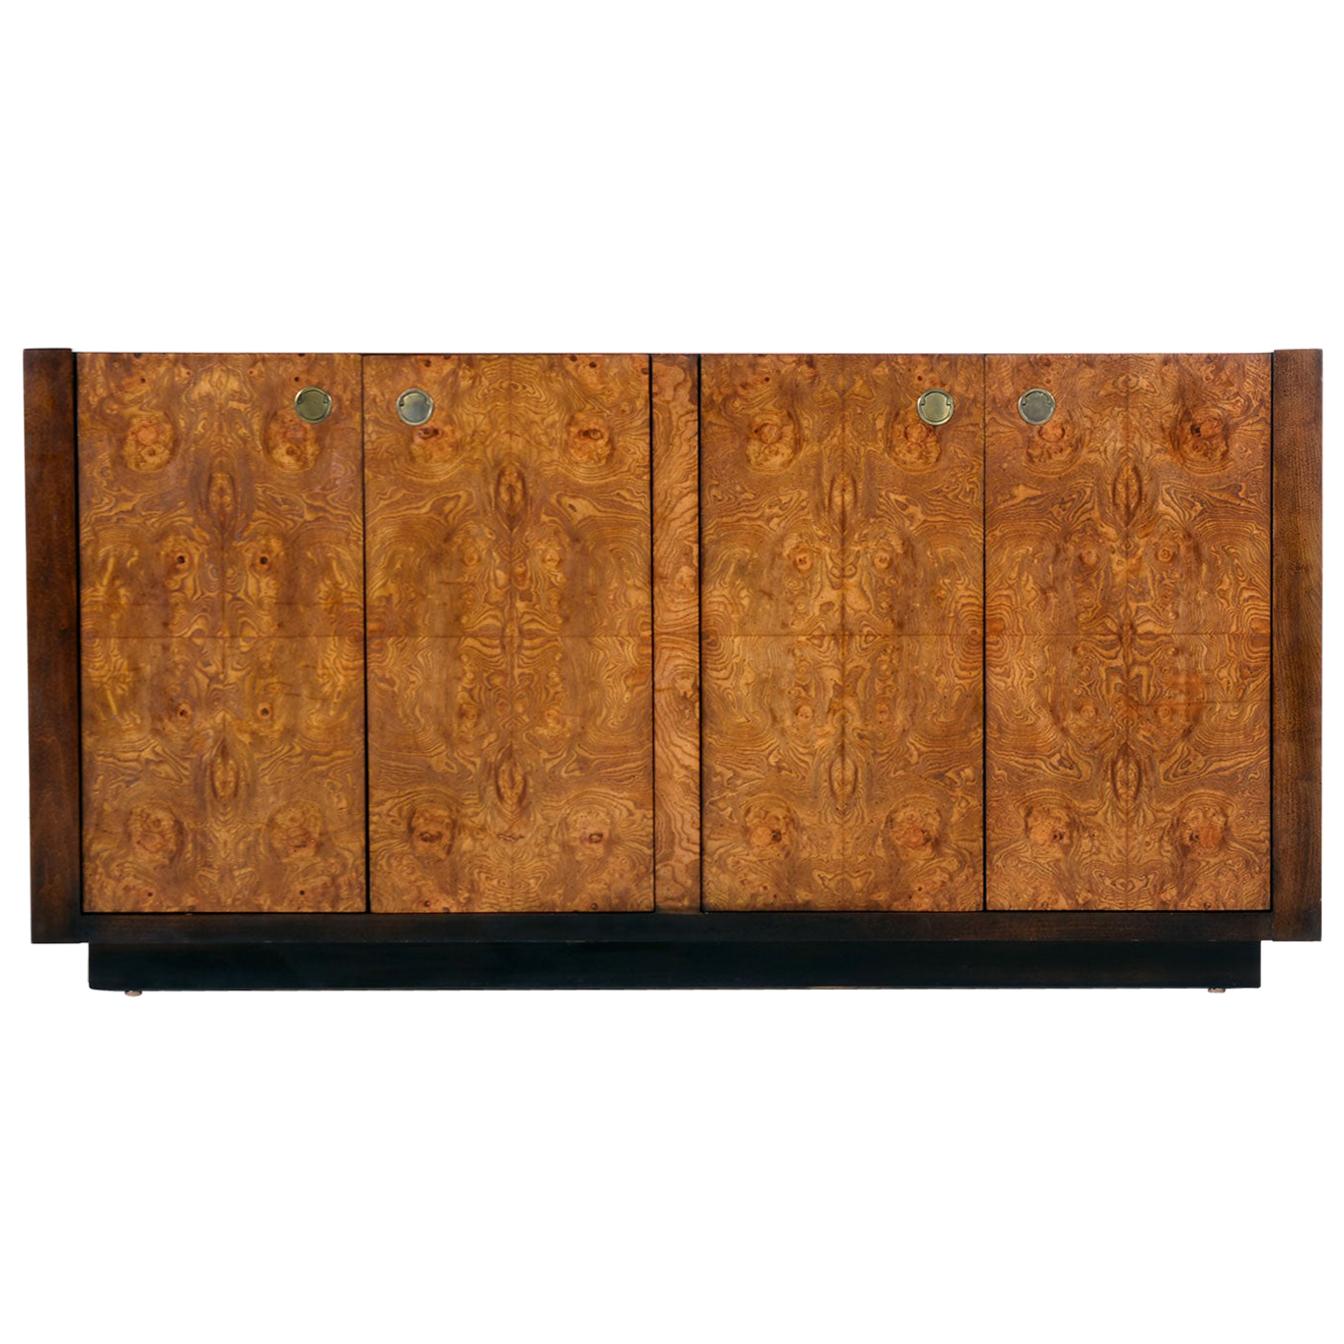 Century Furniture Campaign Style Brass Accent Burl Wood Credenza Cabinet